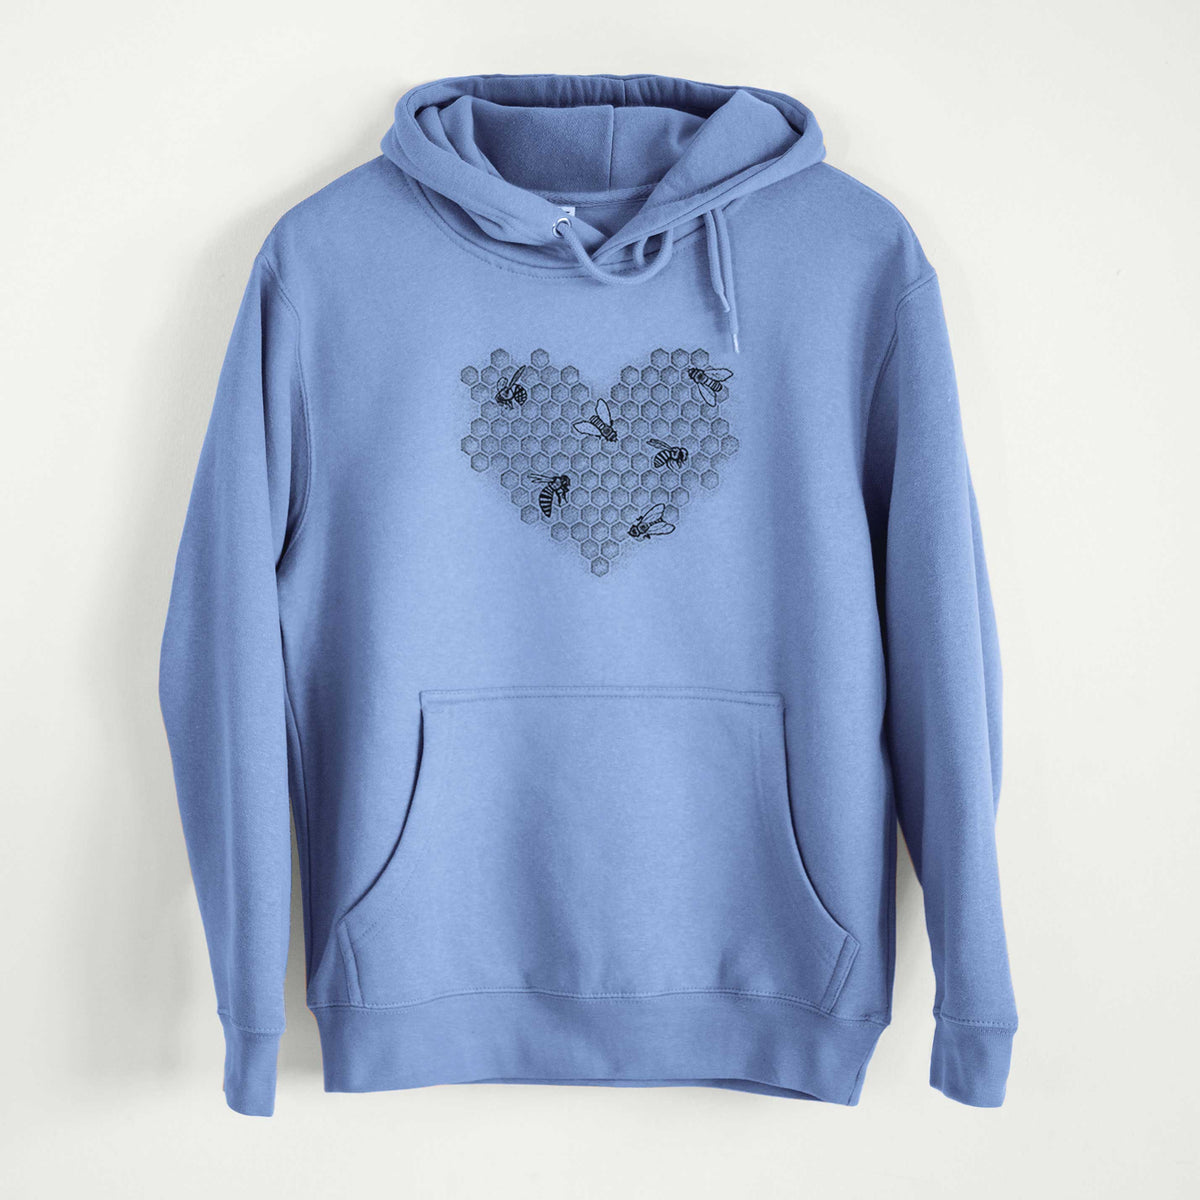 Honeycomb Heart with Bees  - Mid-Weight Unisex Premium Blend Hoodie